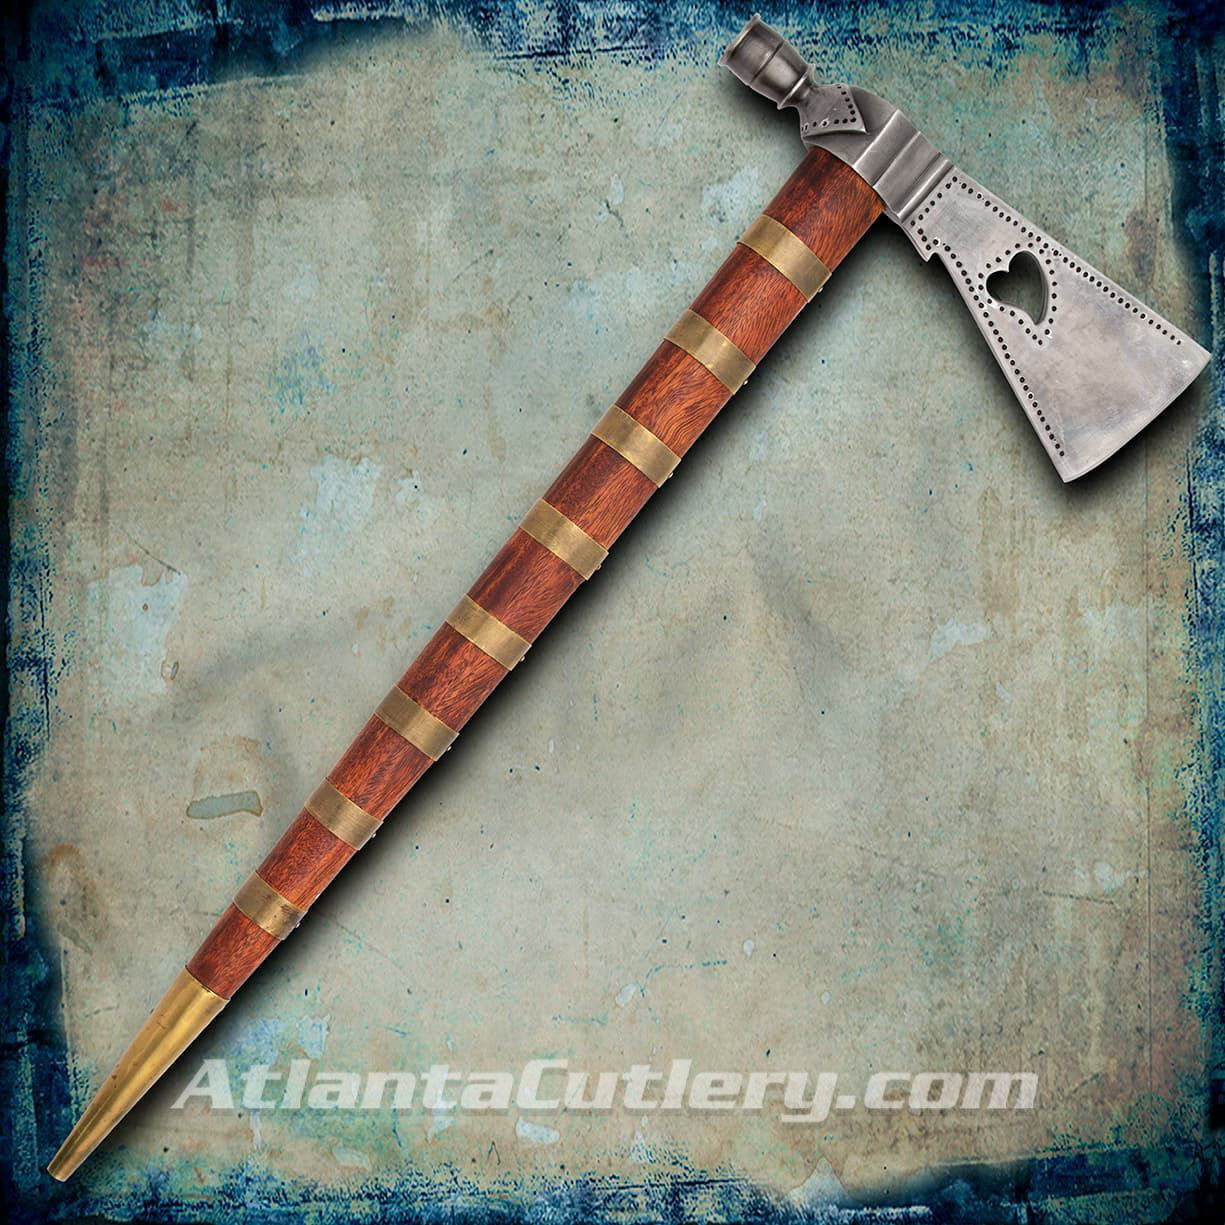 functional 1830’s Peace Pipe Tomahawk has high carbon steel head with weeping heart cut-out, wood handle with brass bands